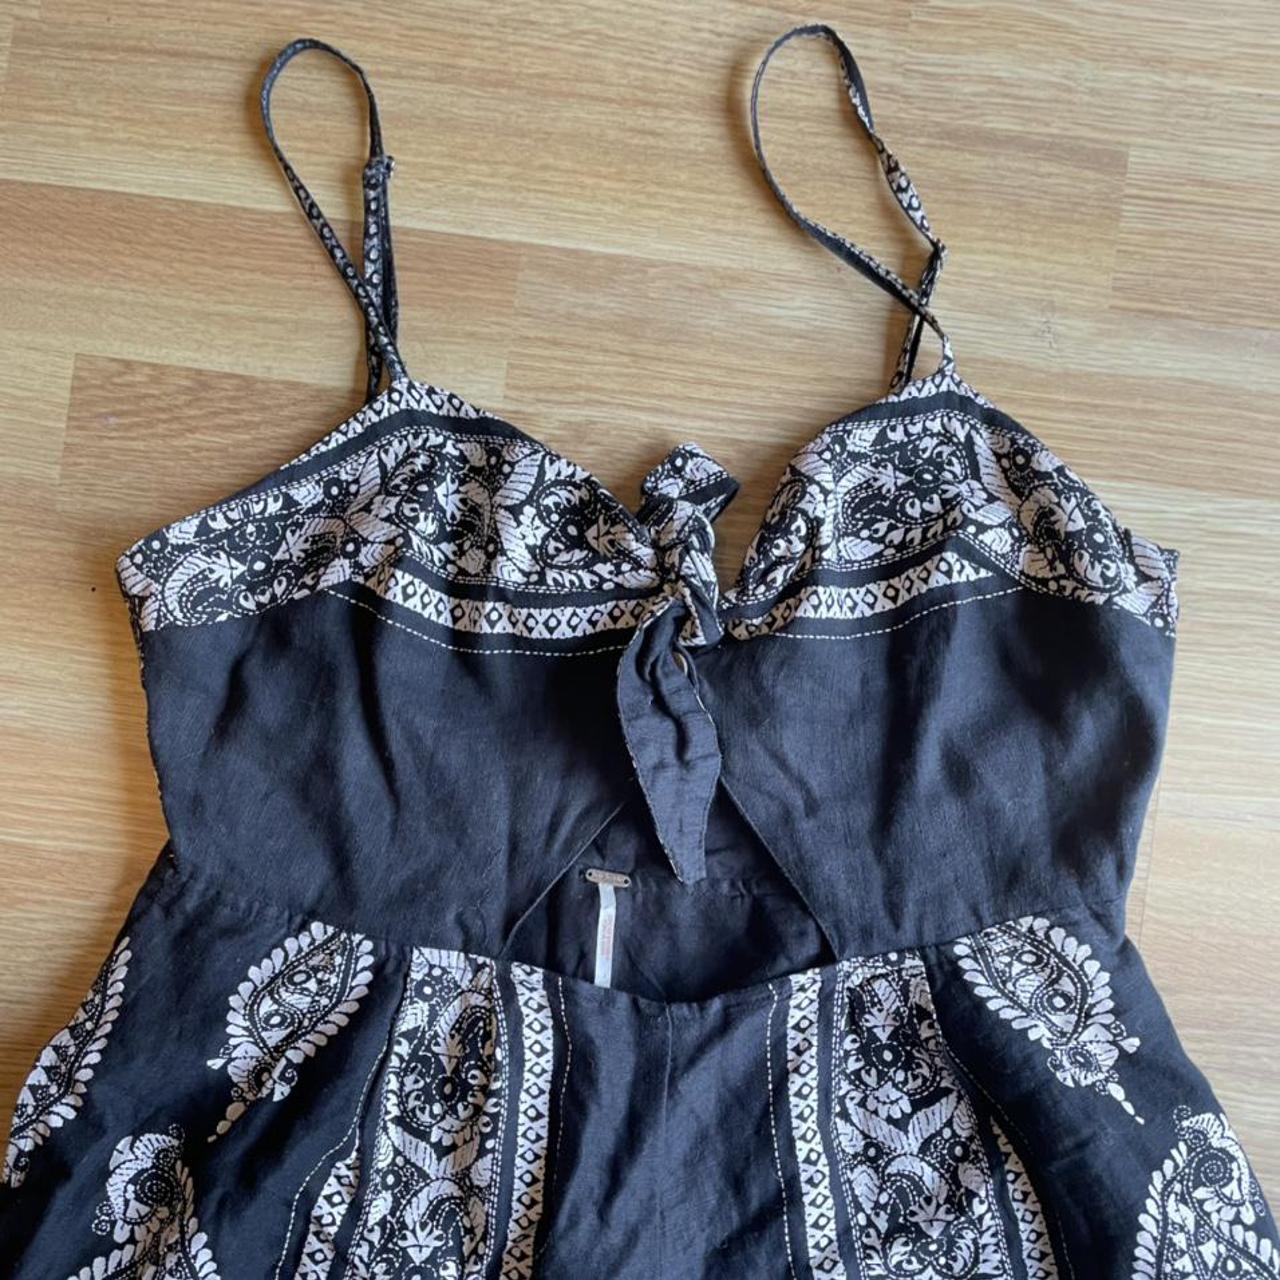 Free People Women's Black and White Dress (3)